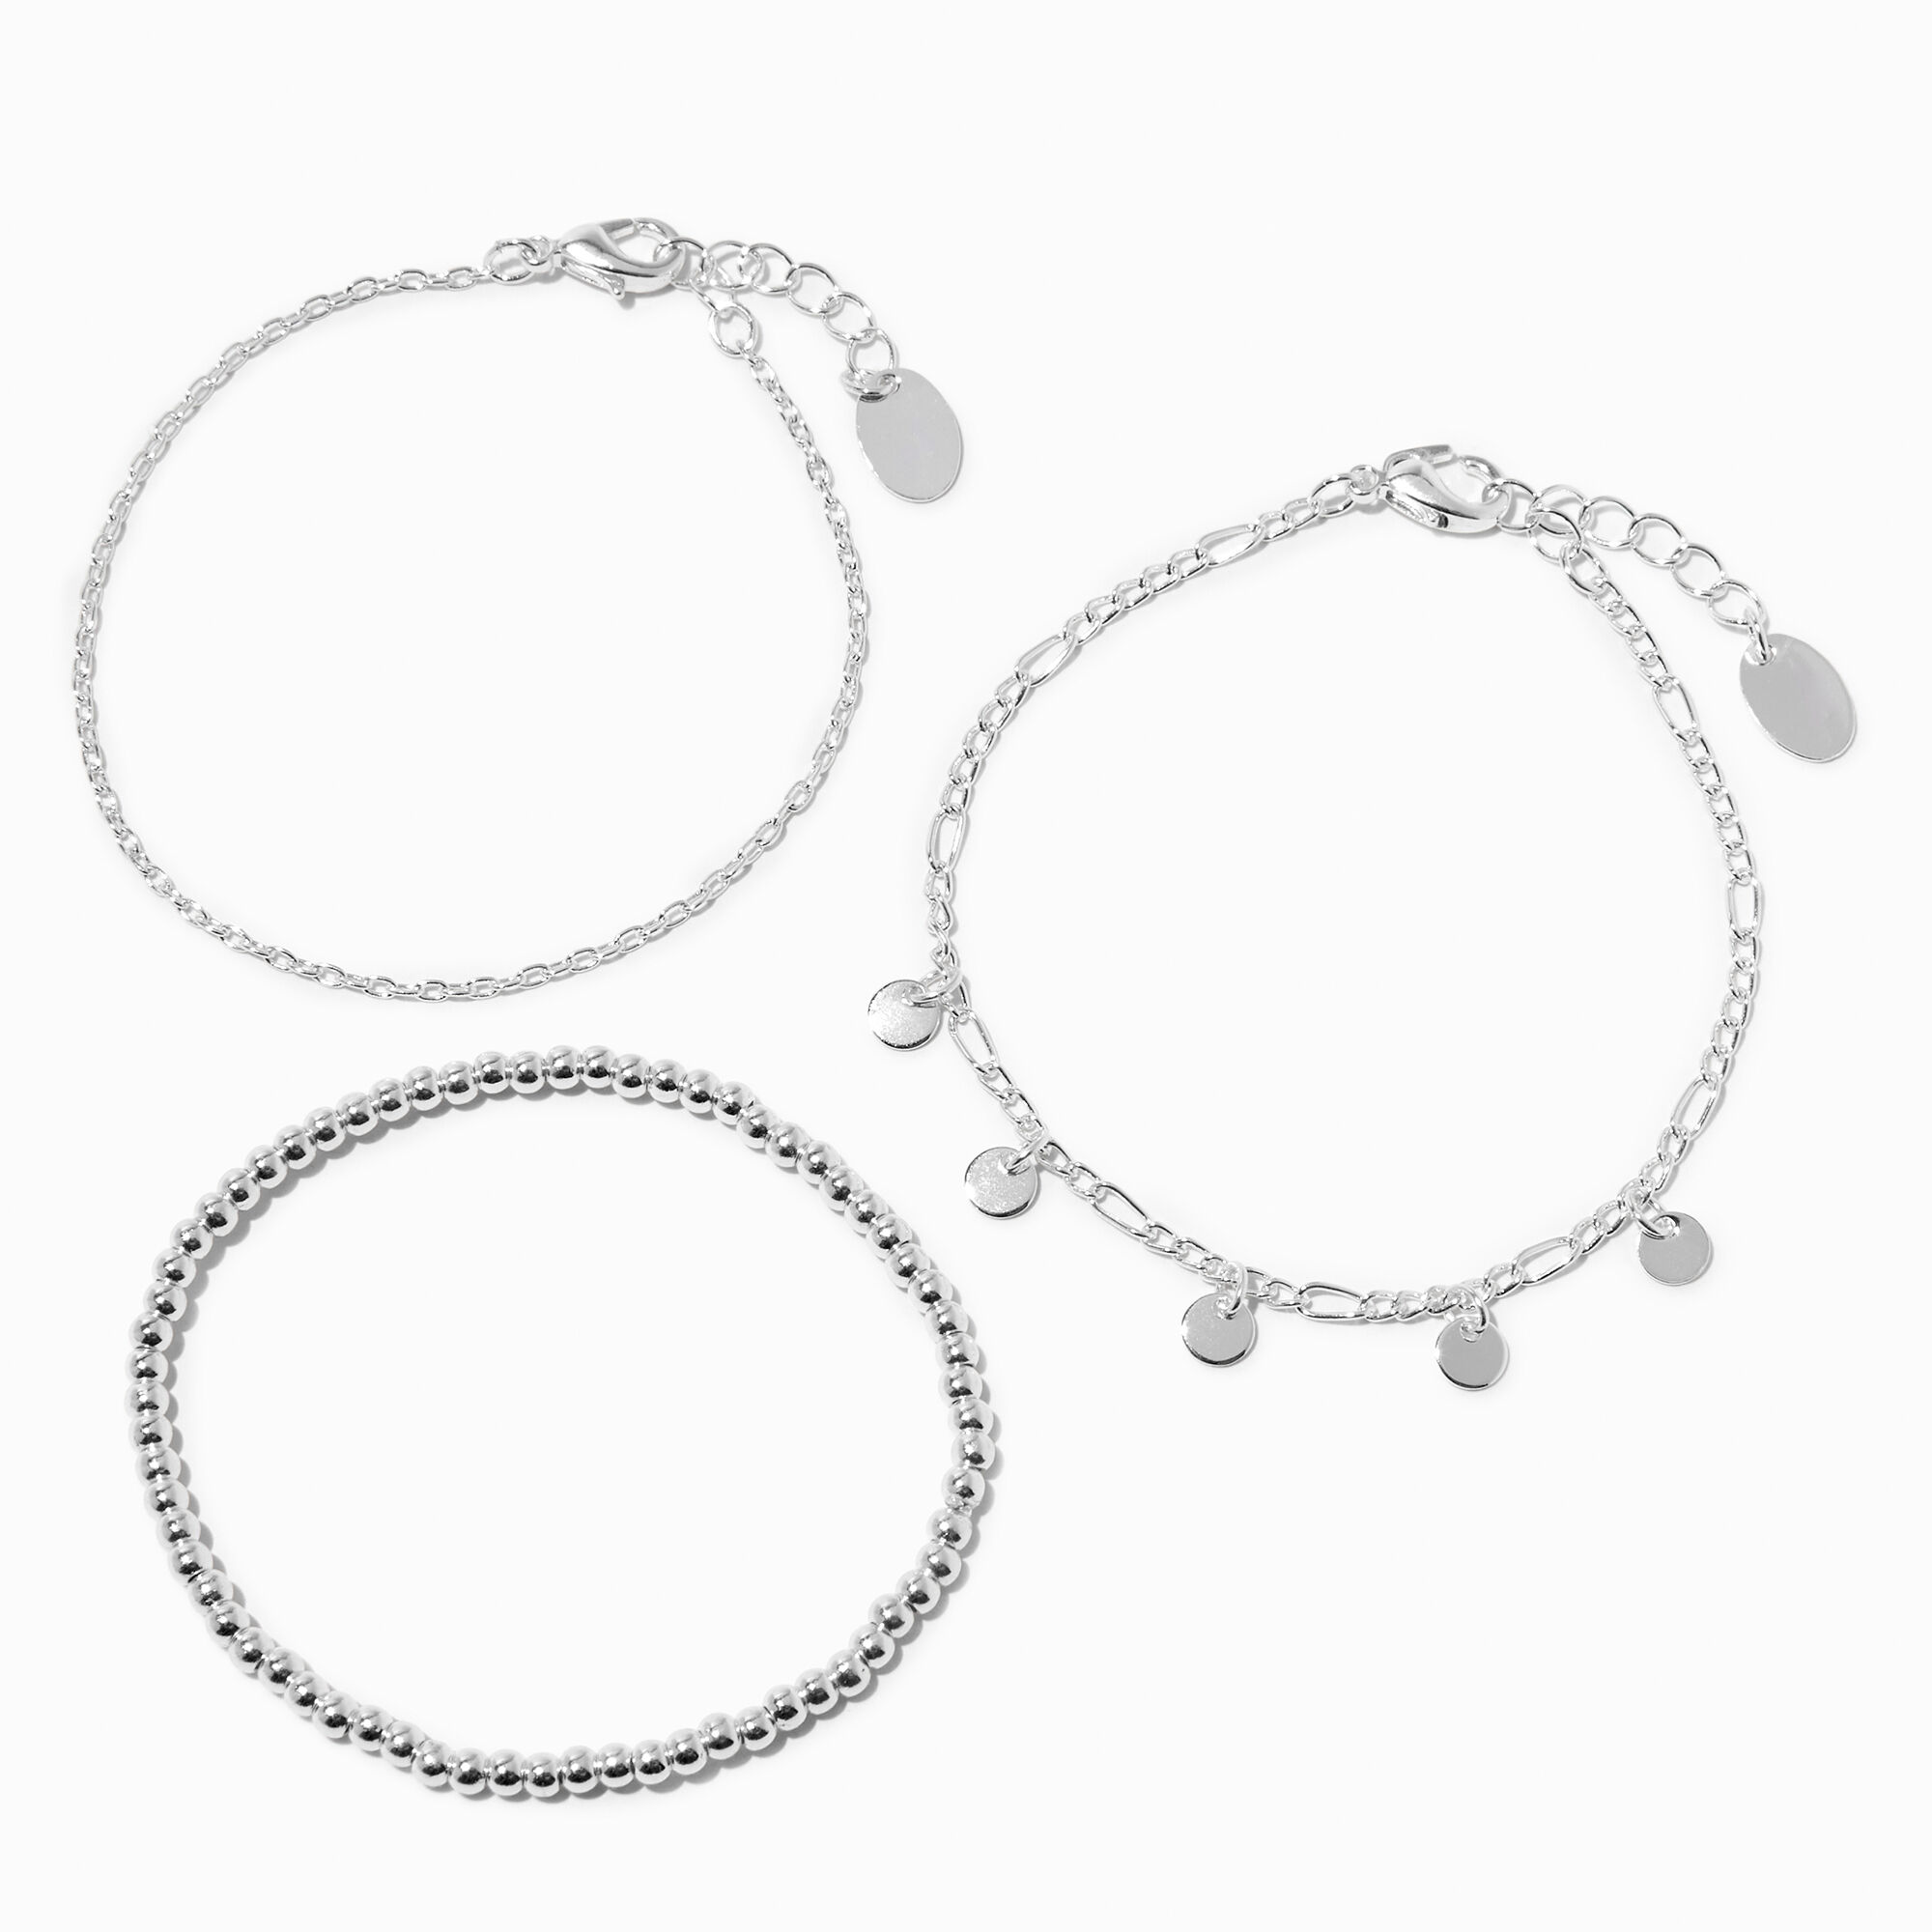 10pcs/lot Rhinestone Silver Hang Number Charms Fit for DIY Wristband & Bracelet LSSL043